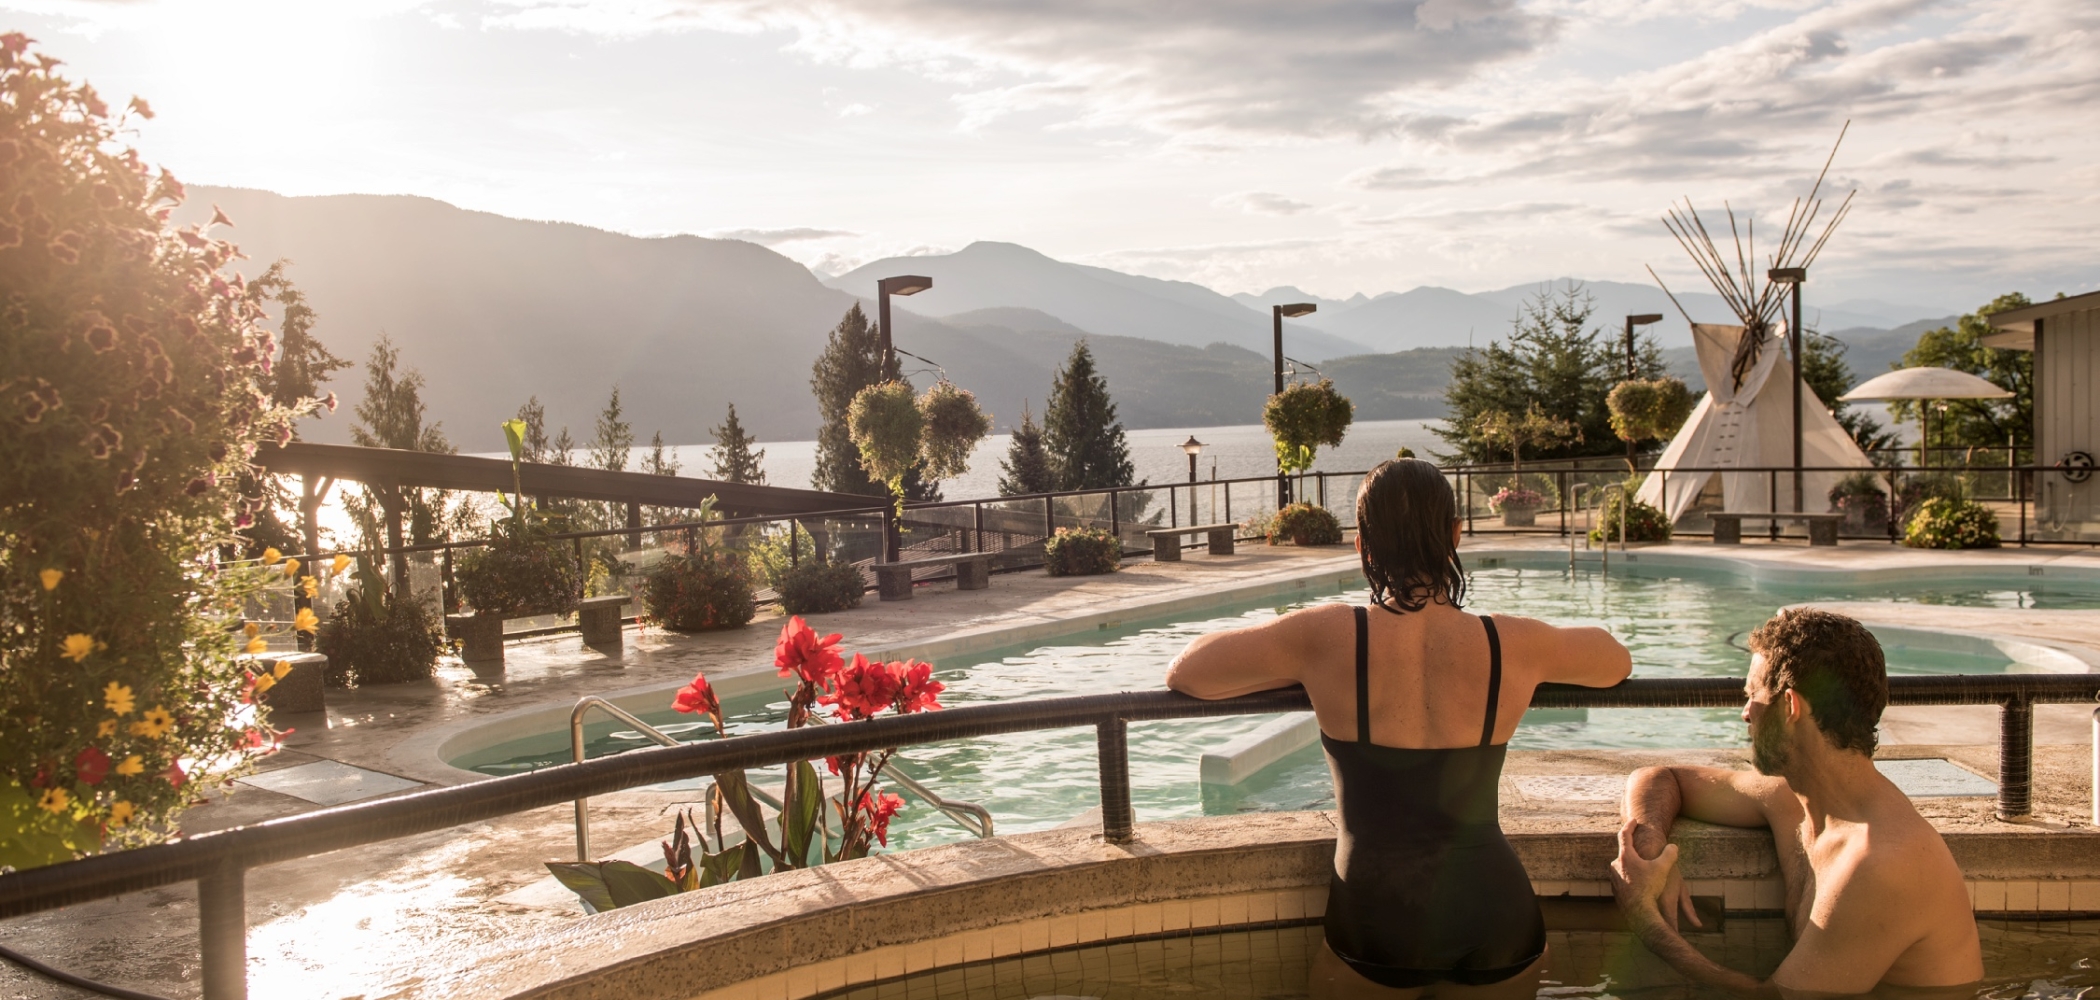 People in a hot spring tub looking out over mountains surrounding Kootenay Lake.